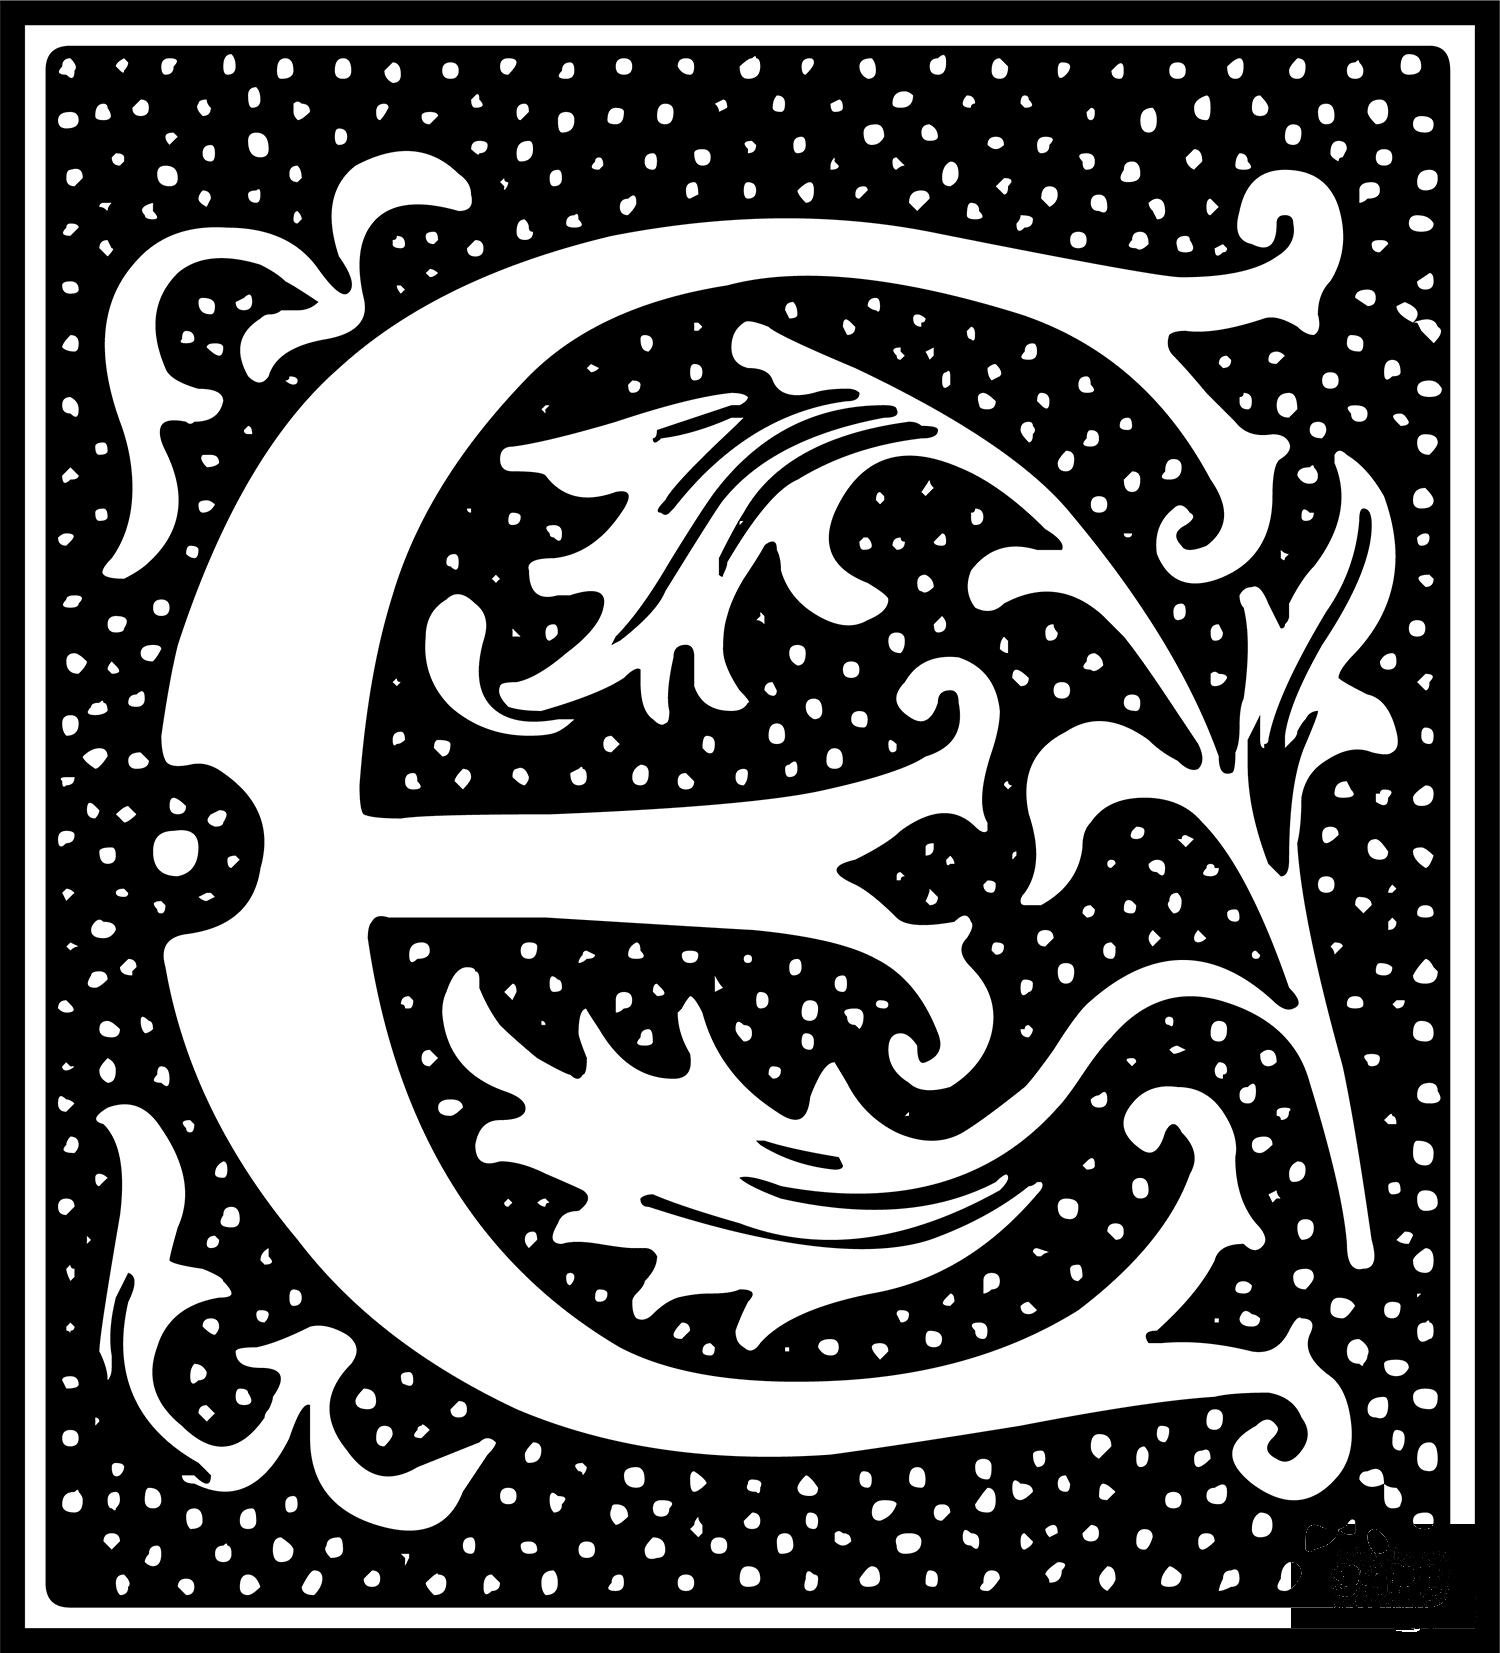 Euclid Initial Letter E coloring page - ColouringPages